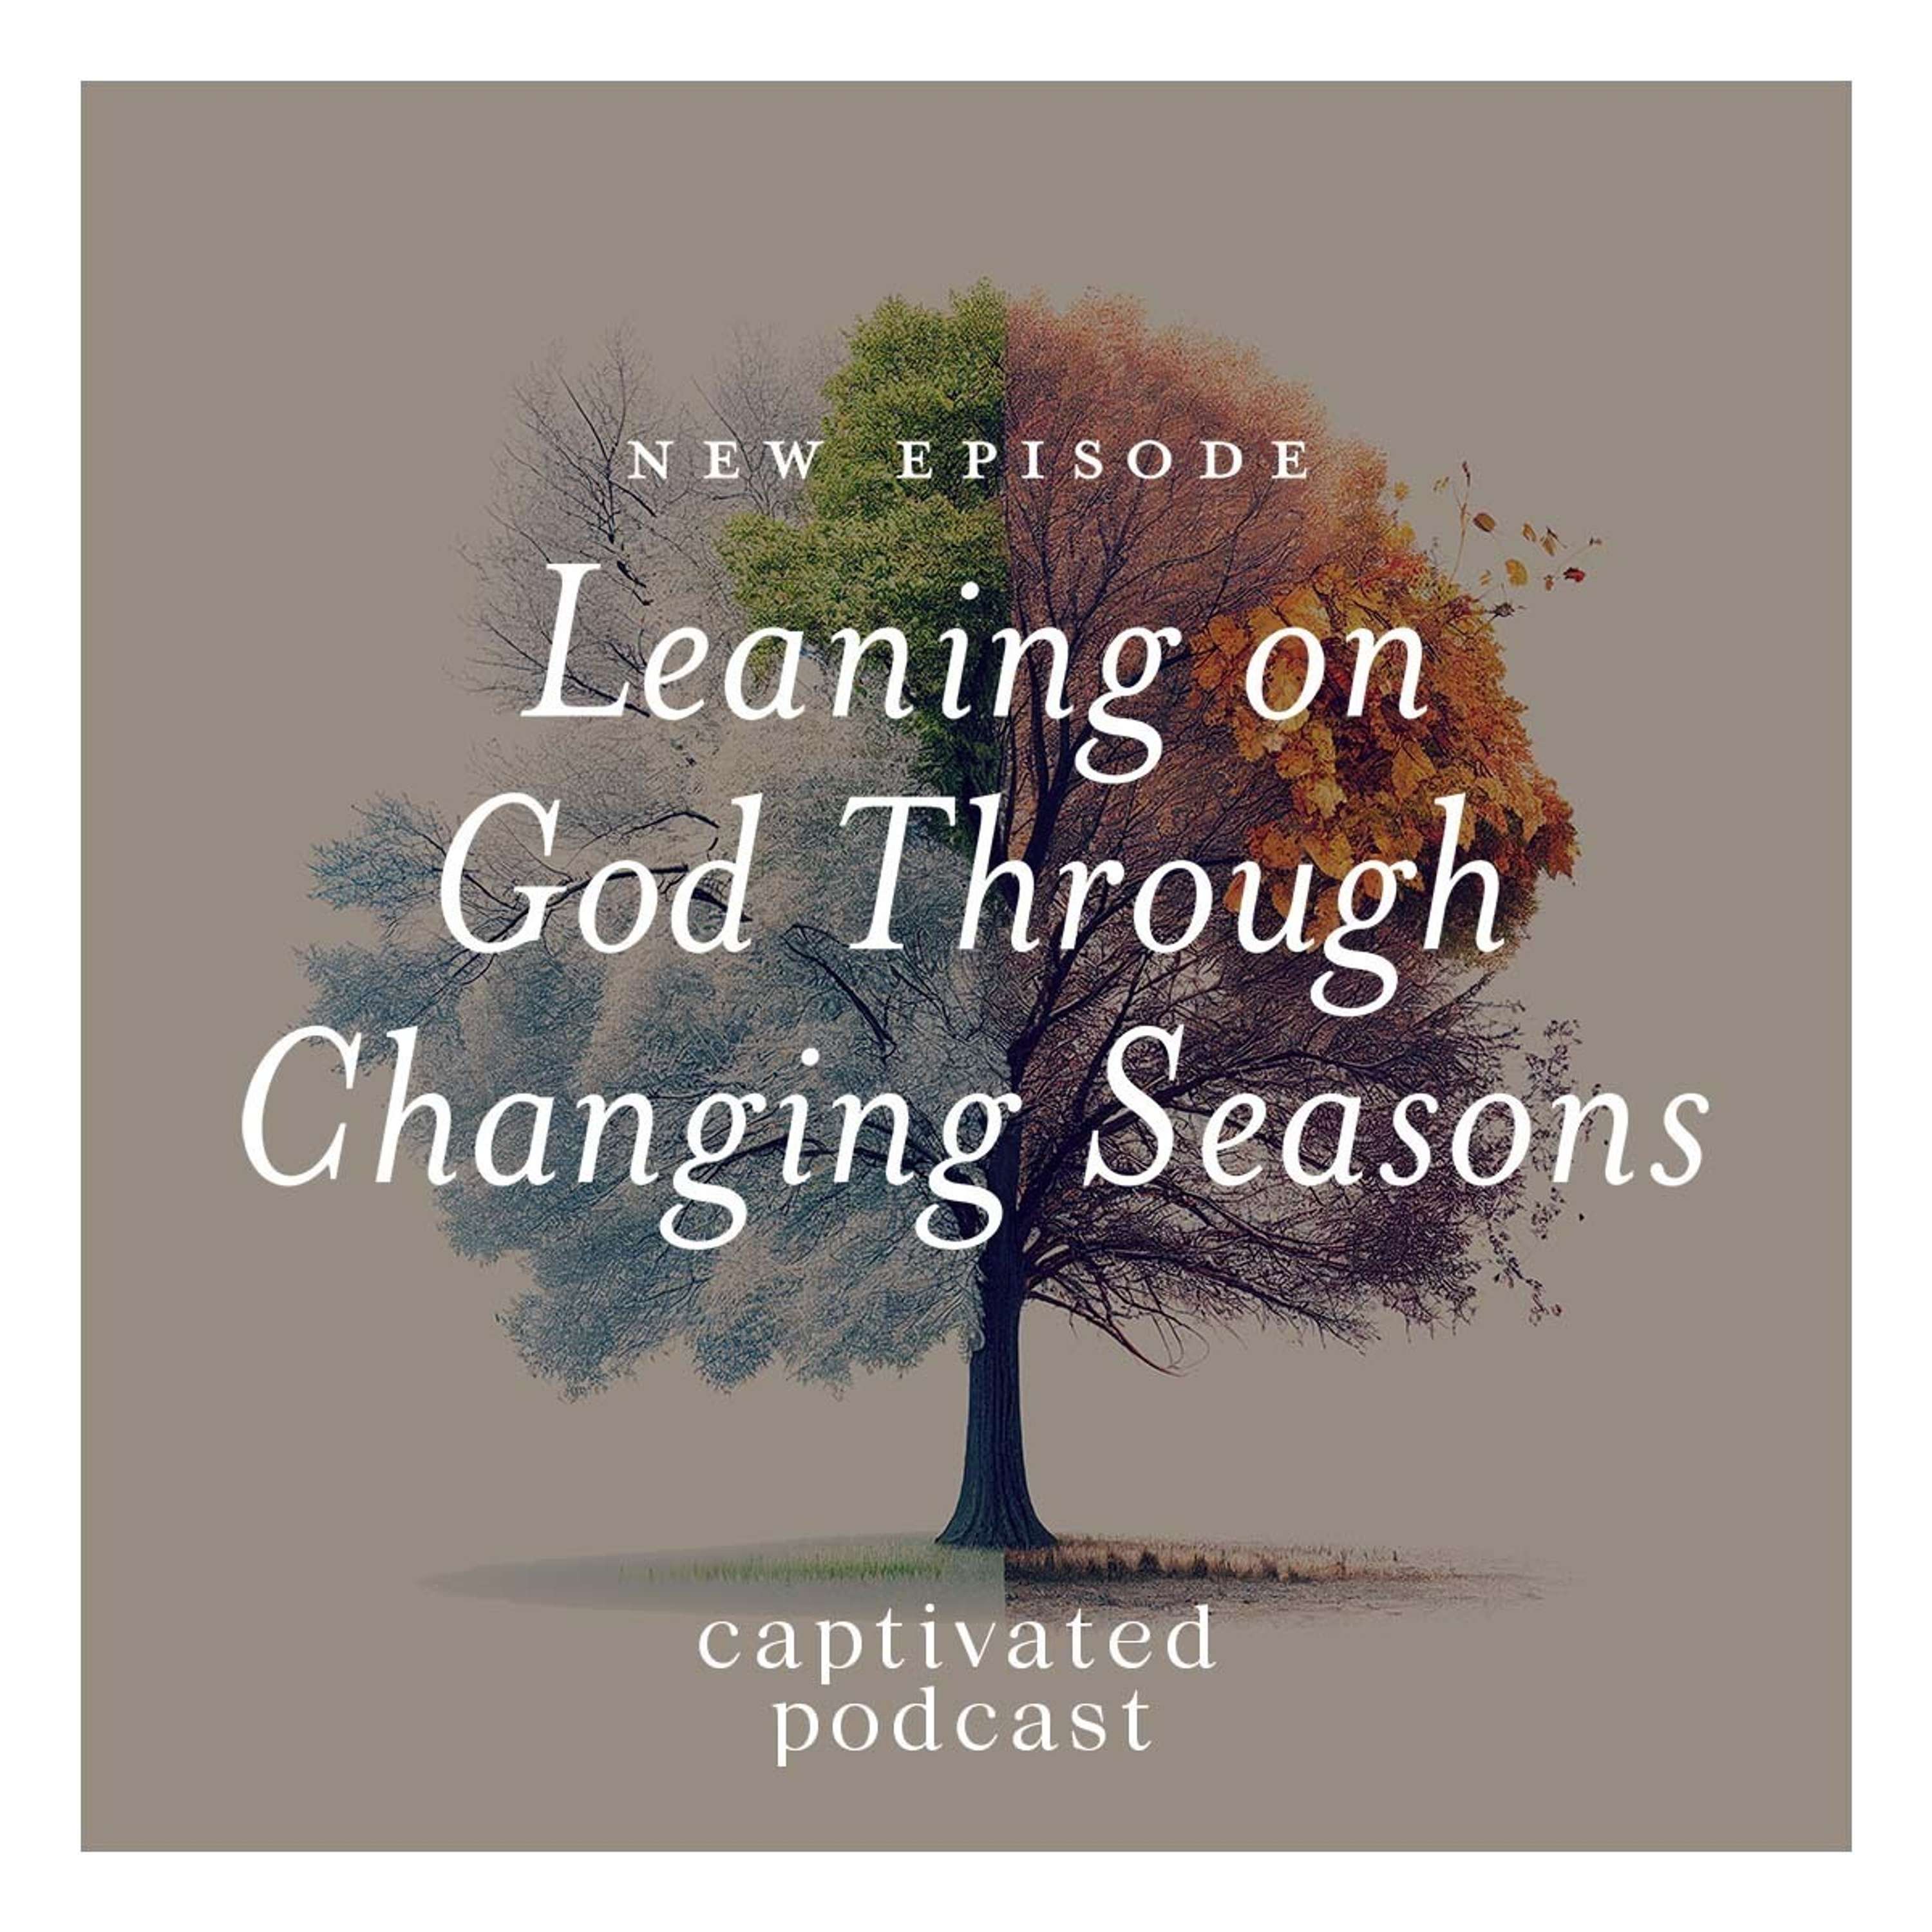 Leaning on God Through Changing Seasons